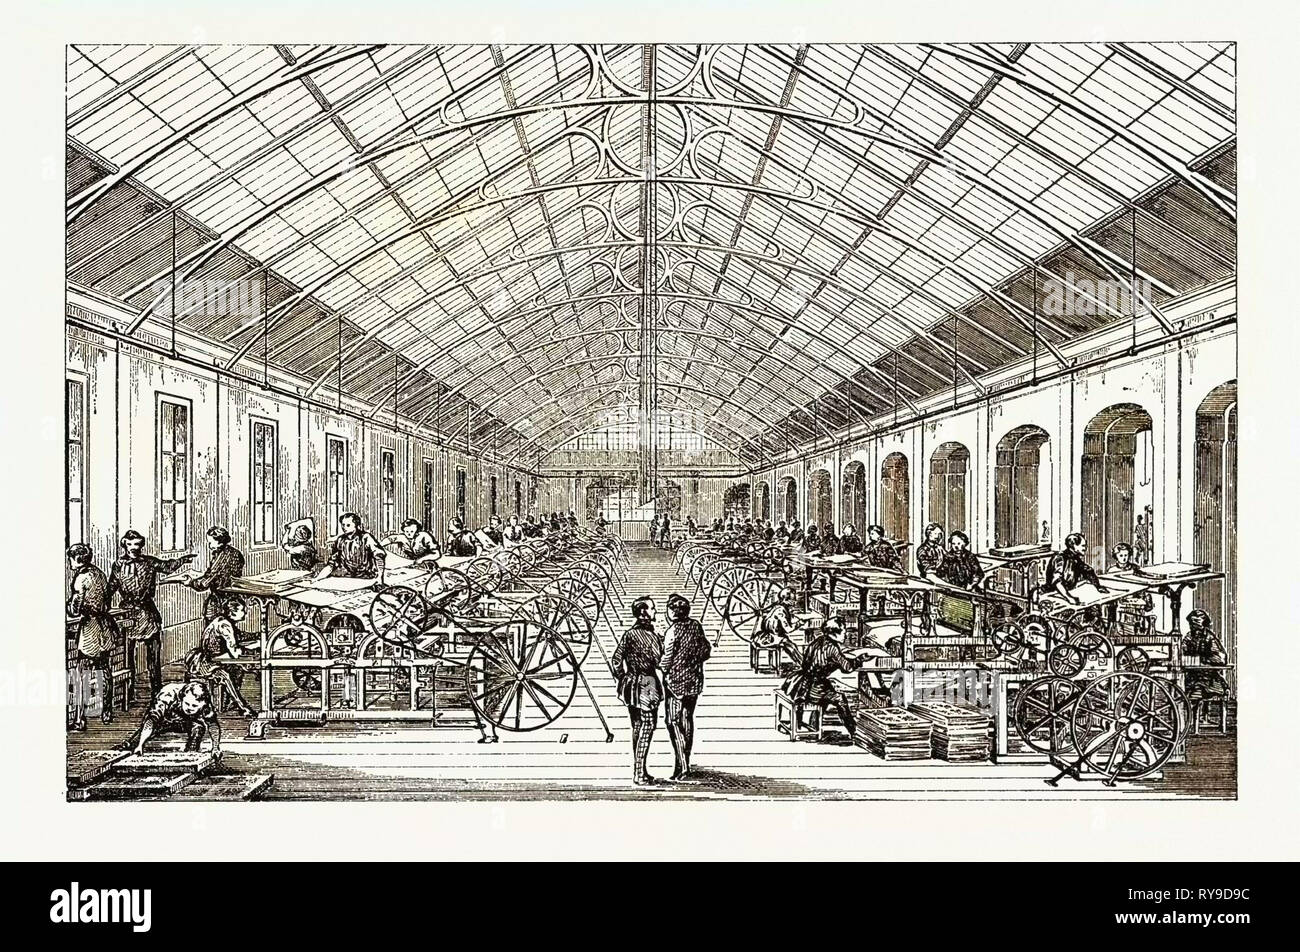 Universal Exposition: Workshop Mecanical Presses. Paris, France, Exposition Universelle. An International Exhibition Held on the Champs-Elysees in 1855, Consisting of an Industrial and an Beaux Arts Exposition. Engraving Stock Photo